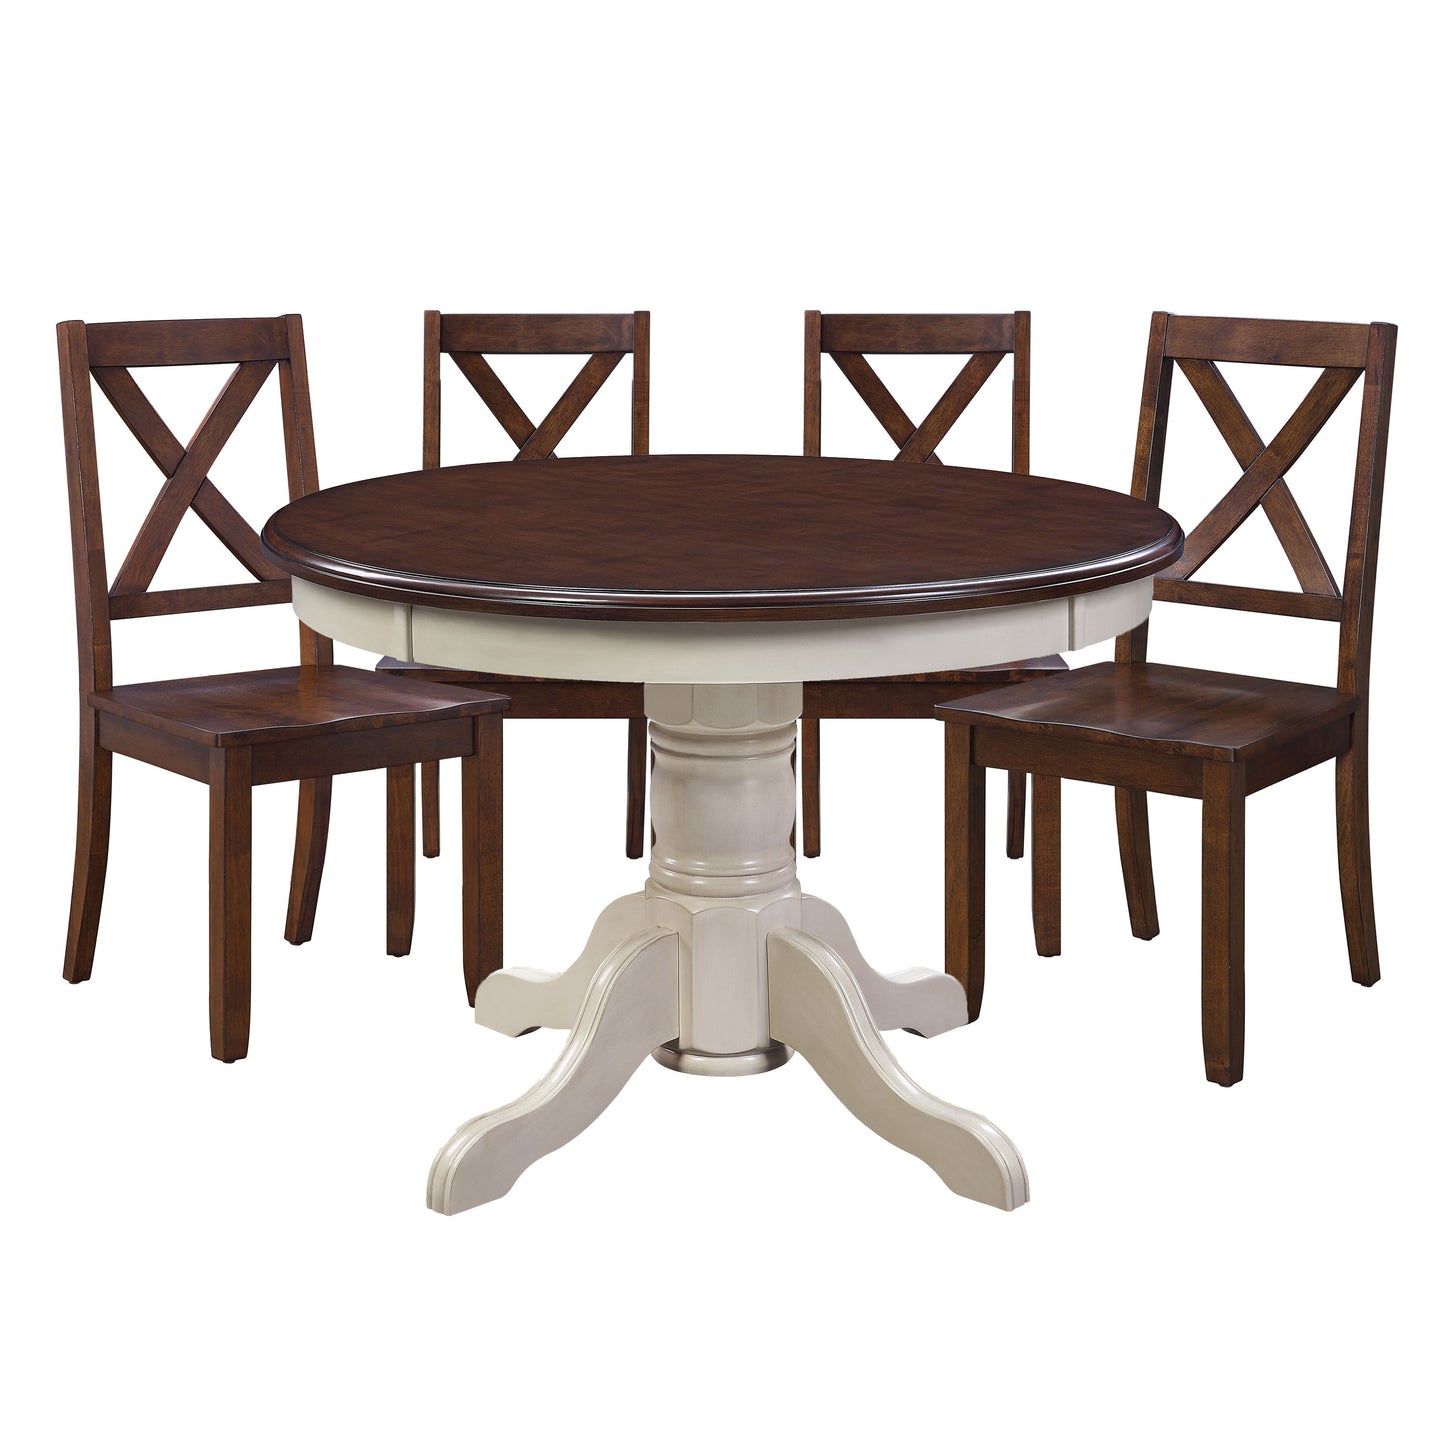 Alluring Natural Solid Wood Round Dining Room Table Set For 4 | Includes Chairs